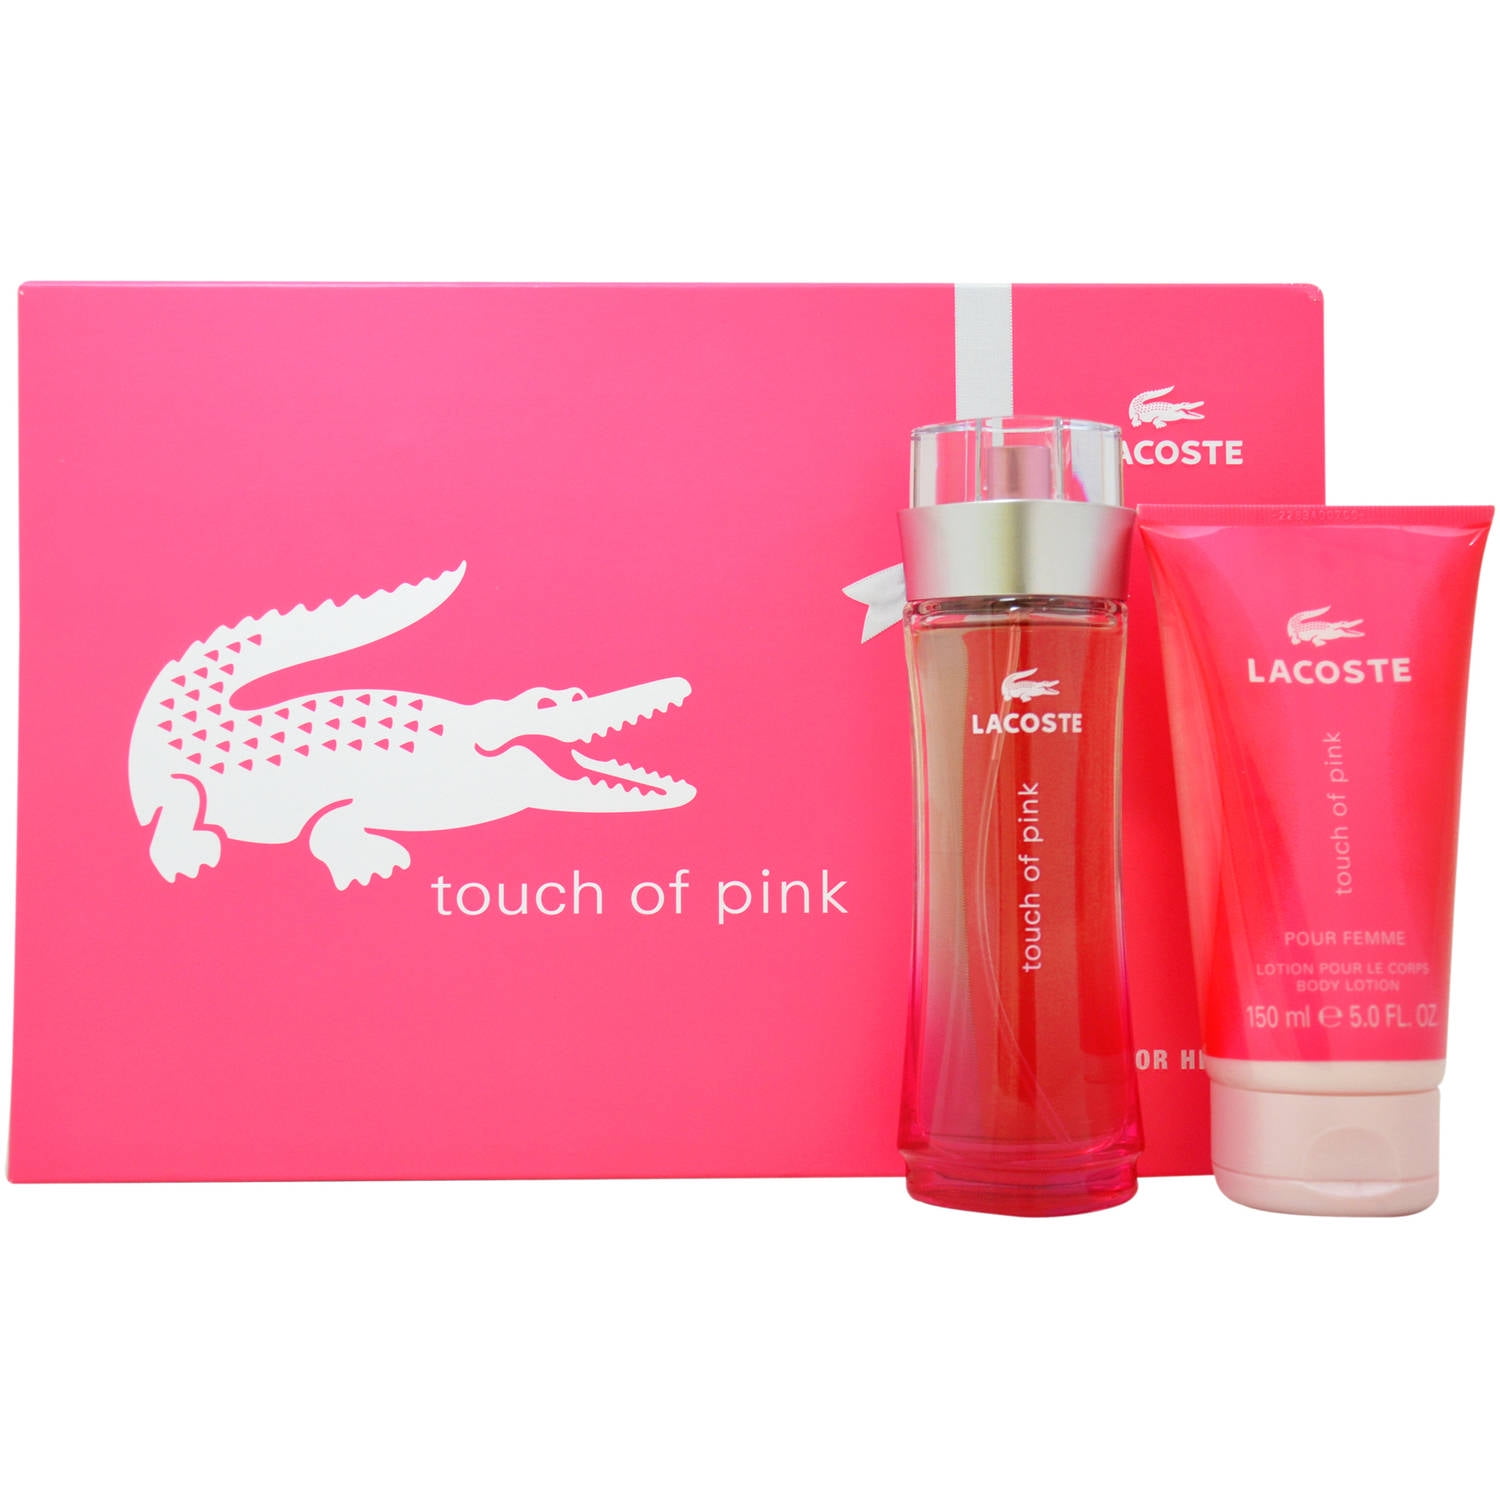 Lacoste Touch of Pink Fragrance Gift Set, pc - Walmart.com